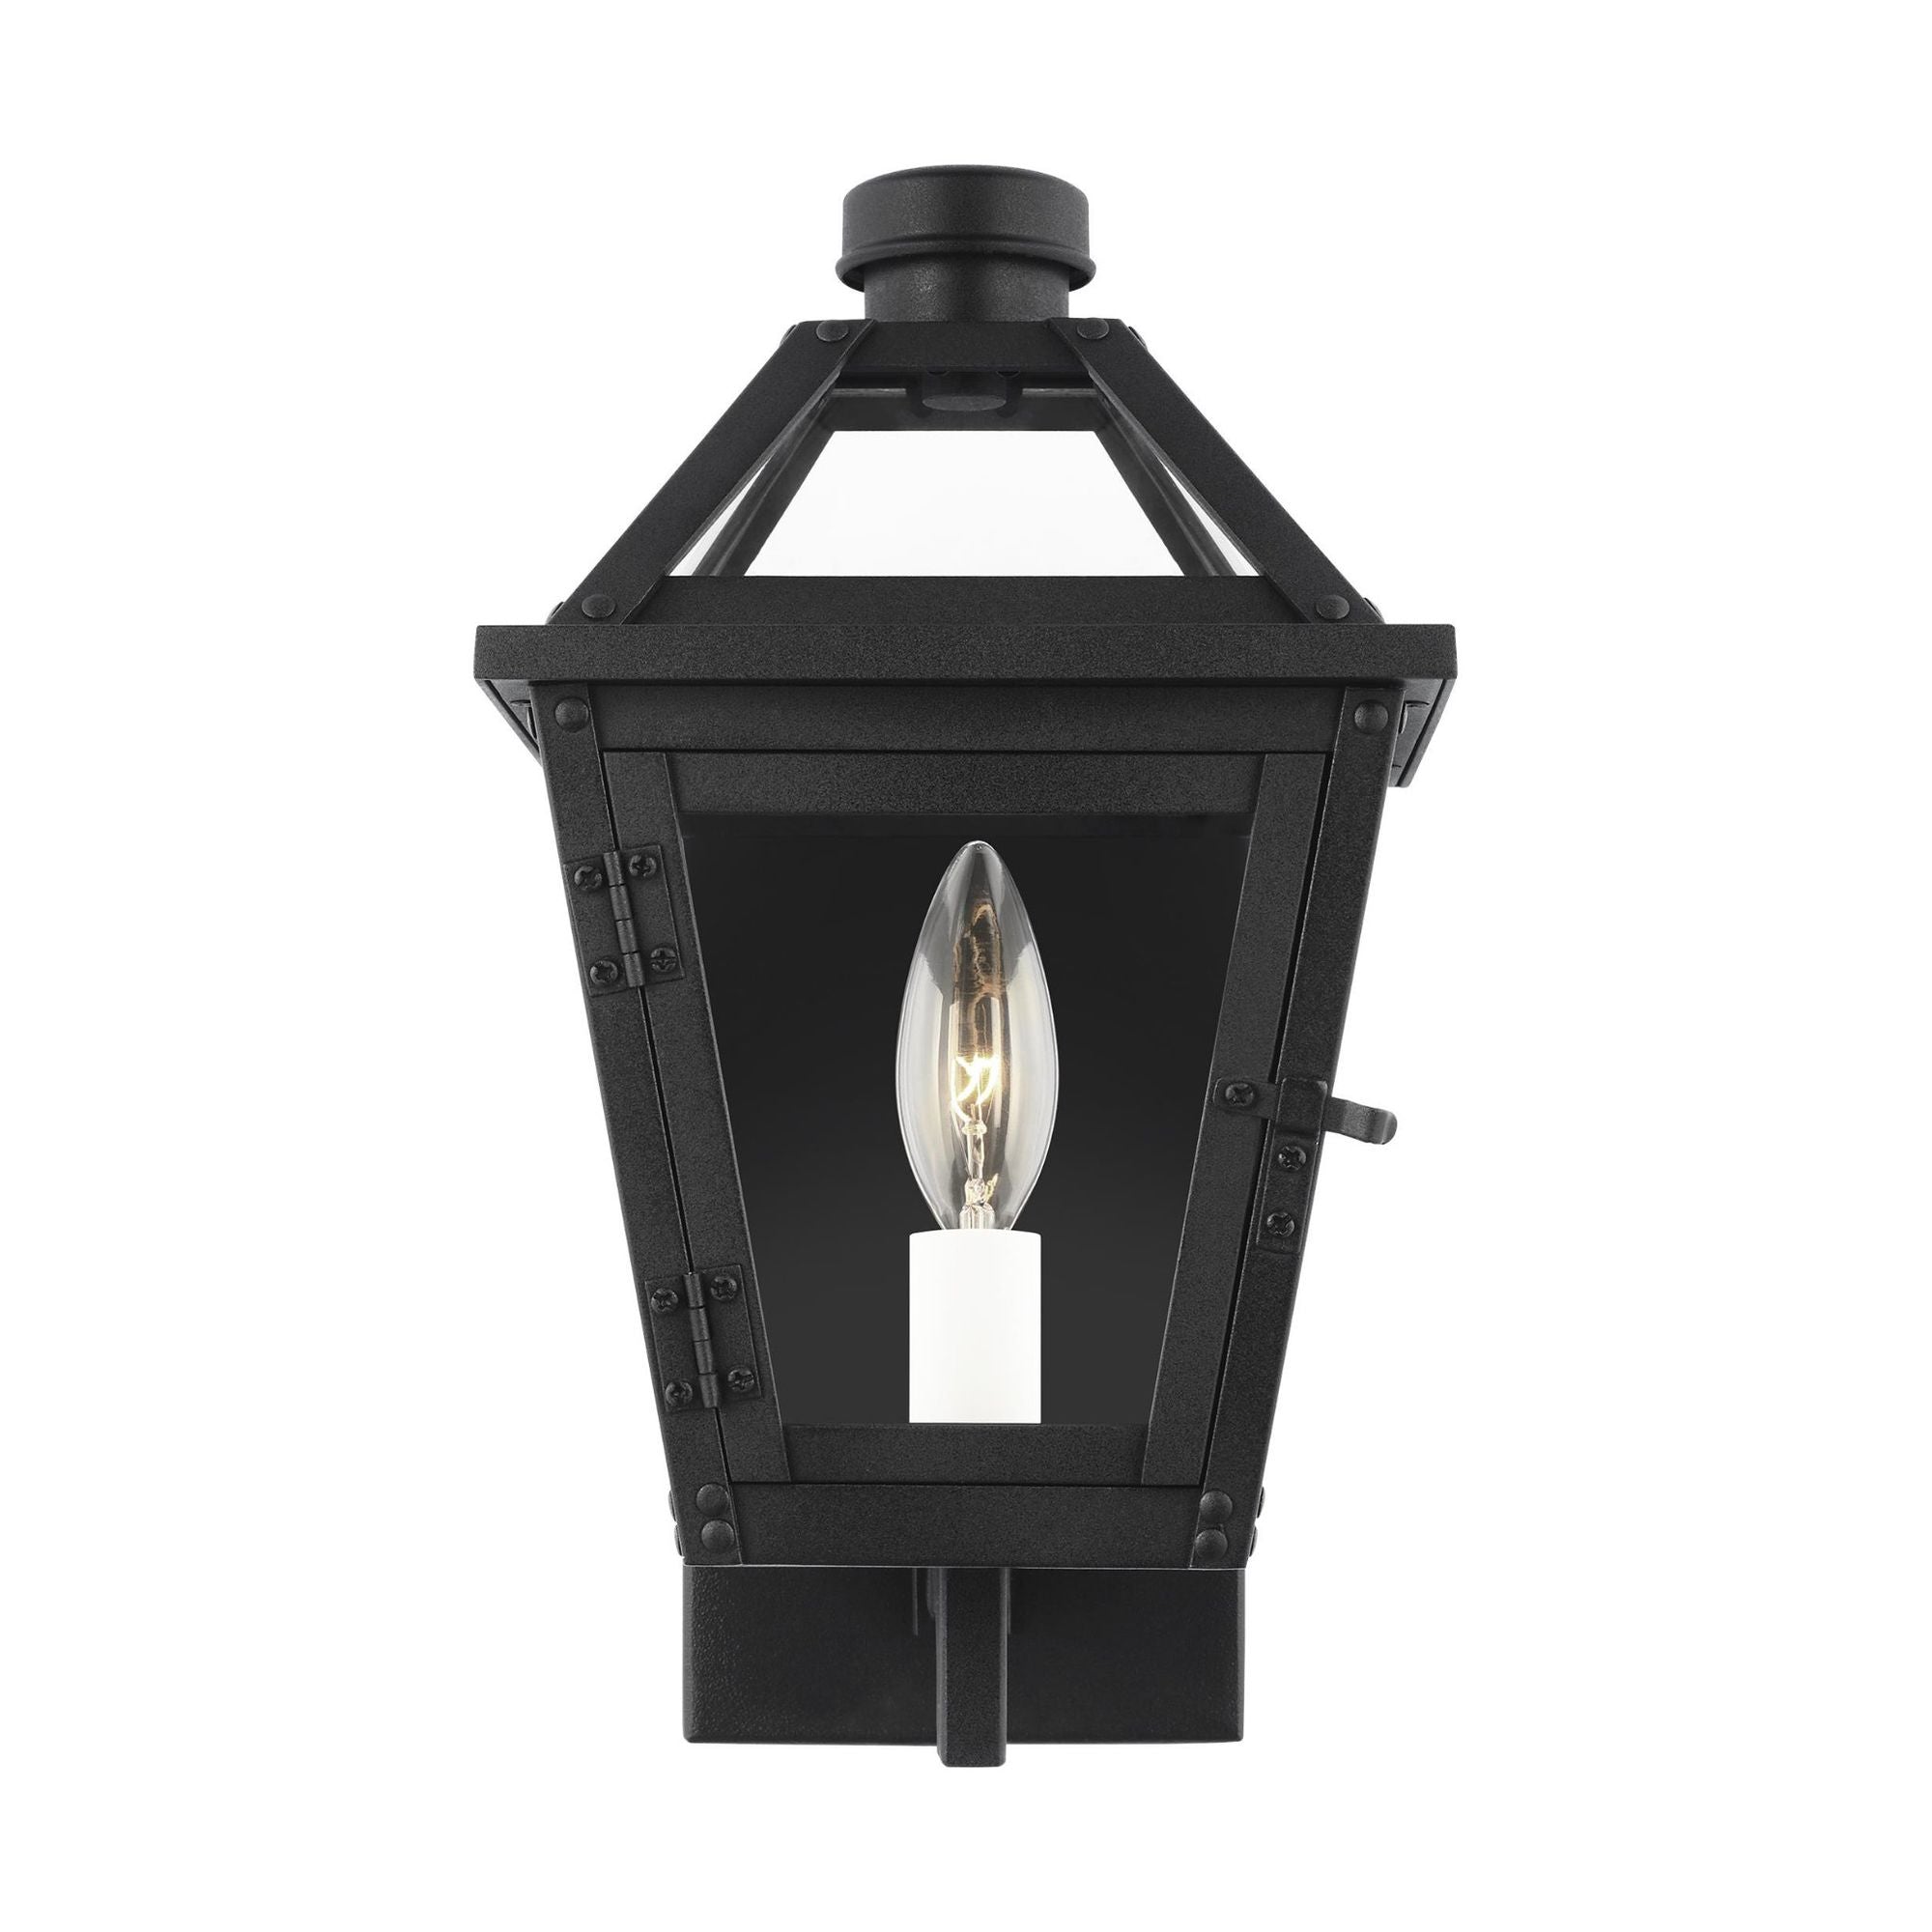 Chapman & Myers Hyannis Extra Small Wall Lantern in Textured Black